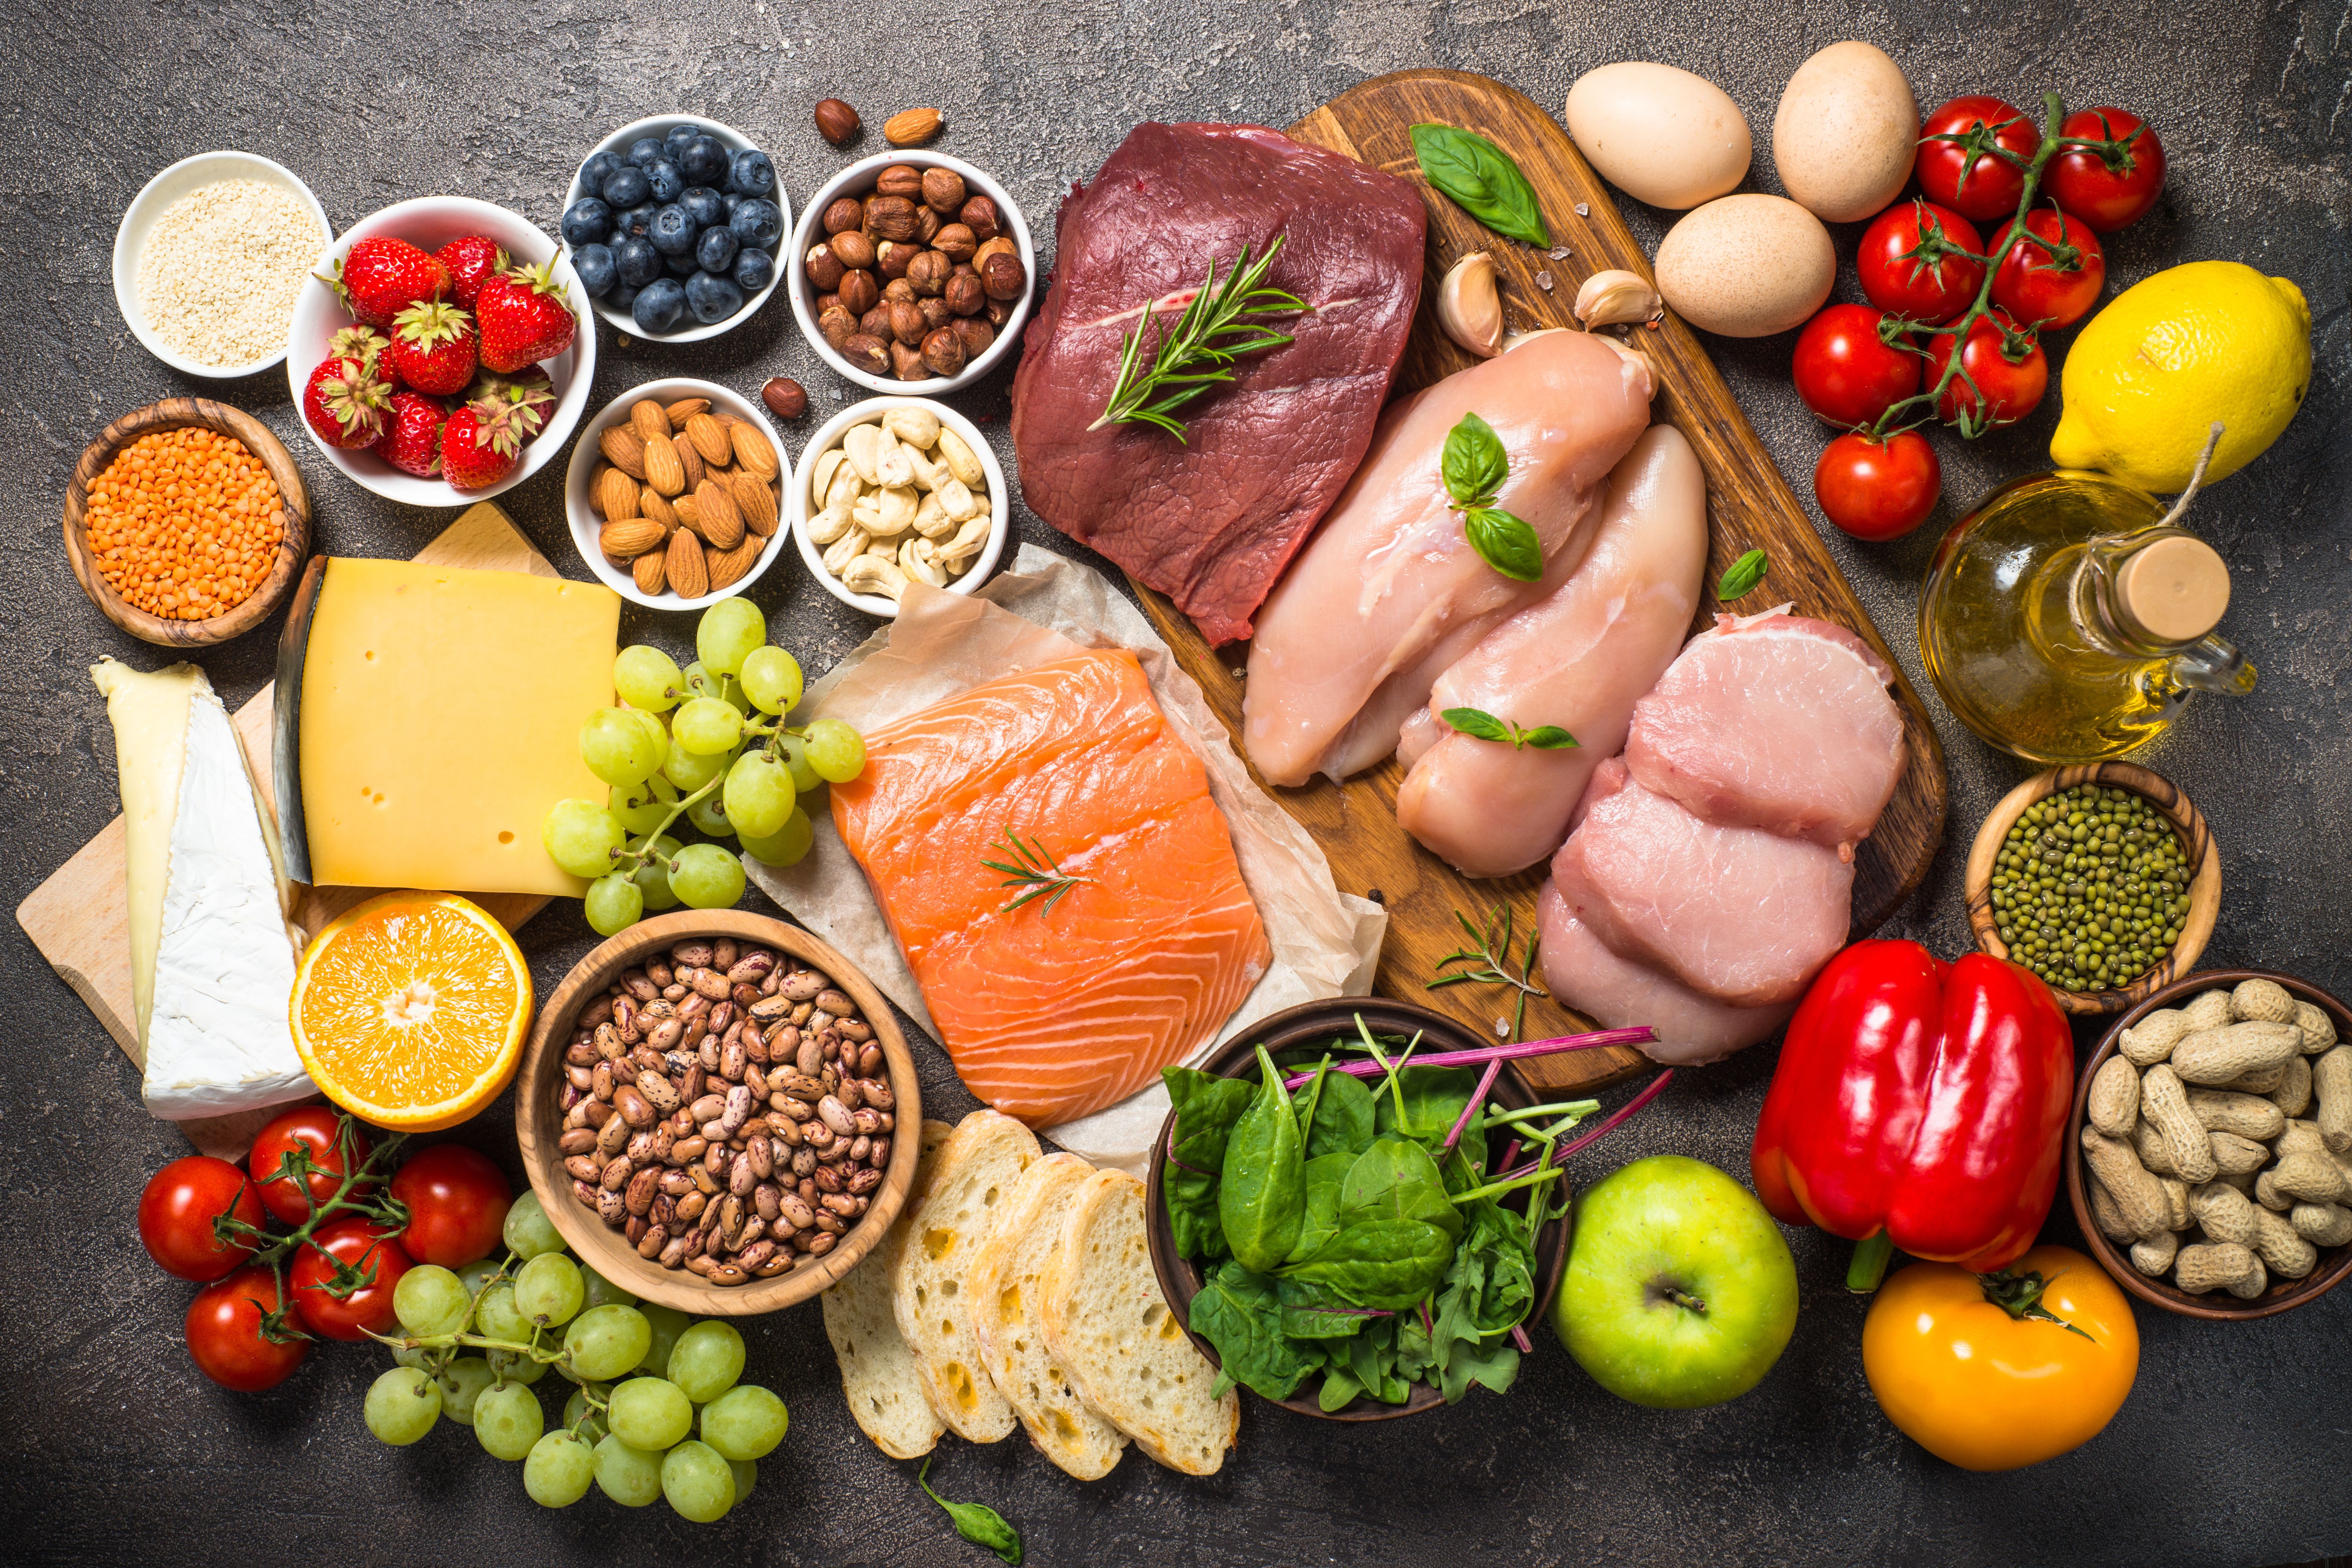 Currently, there is no consensus on the best diet for managing MS | image credit: nadianb - stock.adobe.com